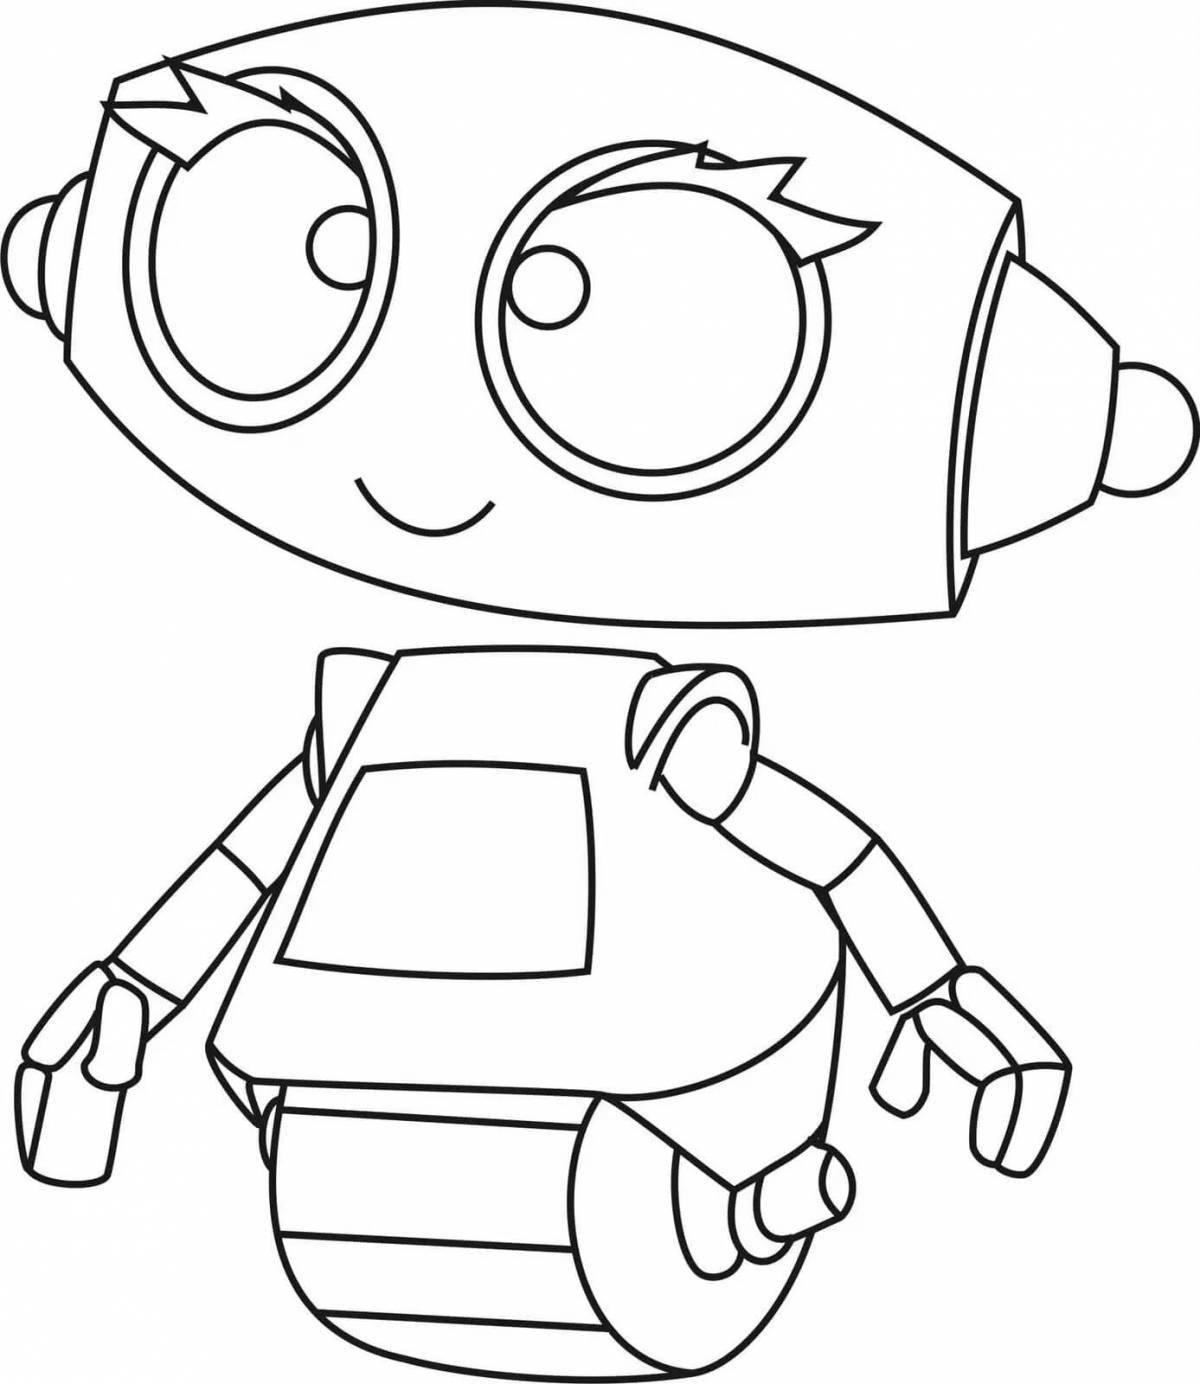 Adorable robot coloring book for 5 year olds